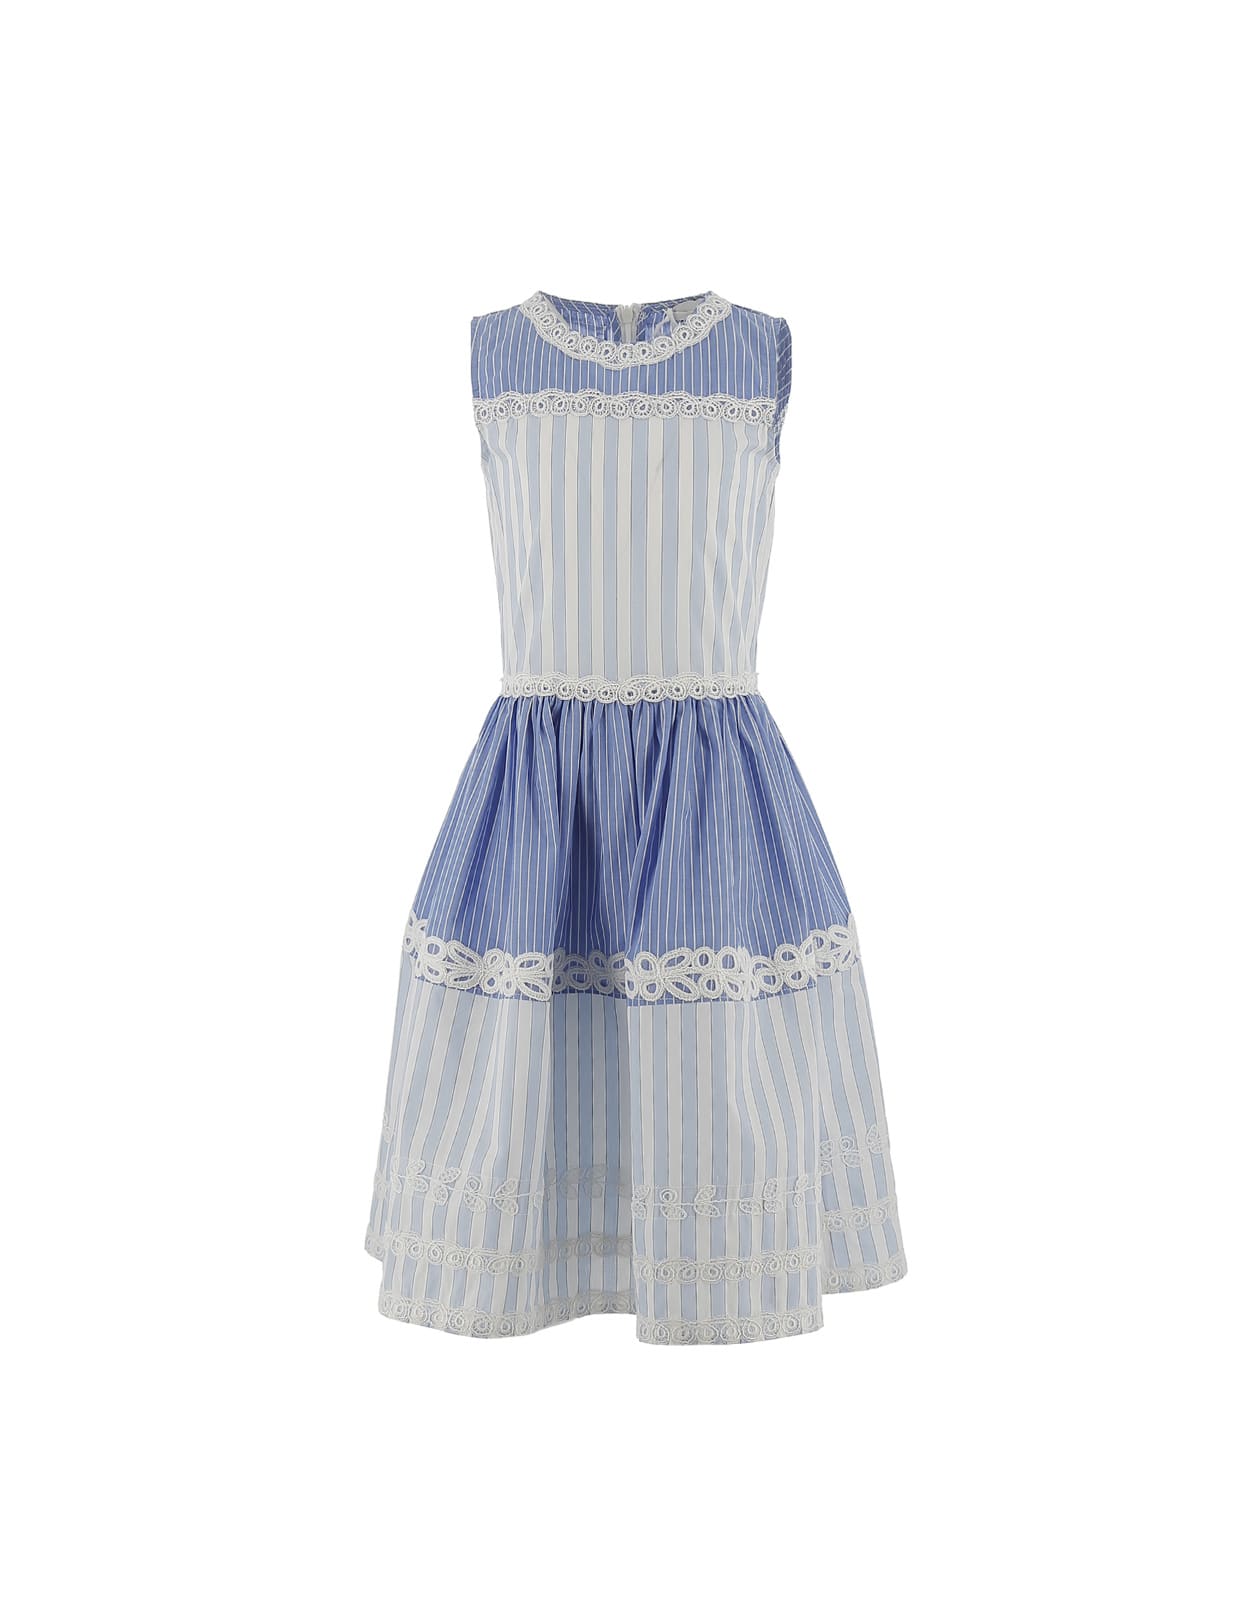 ERMANNO SCERVINO JUNIOR BLUE AND WHITE DRESS WITH STRIPED PATTERN